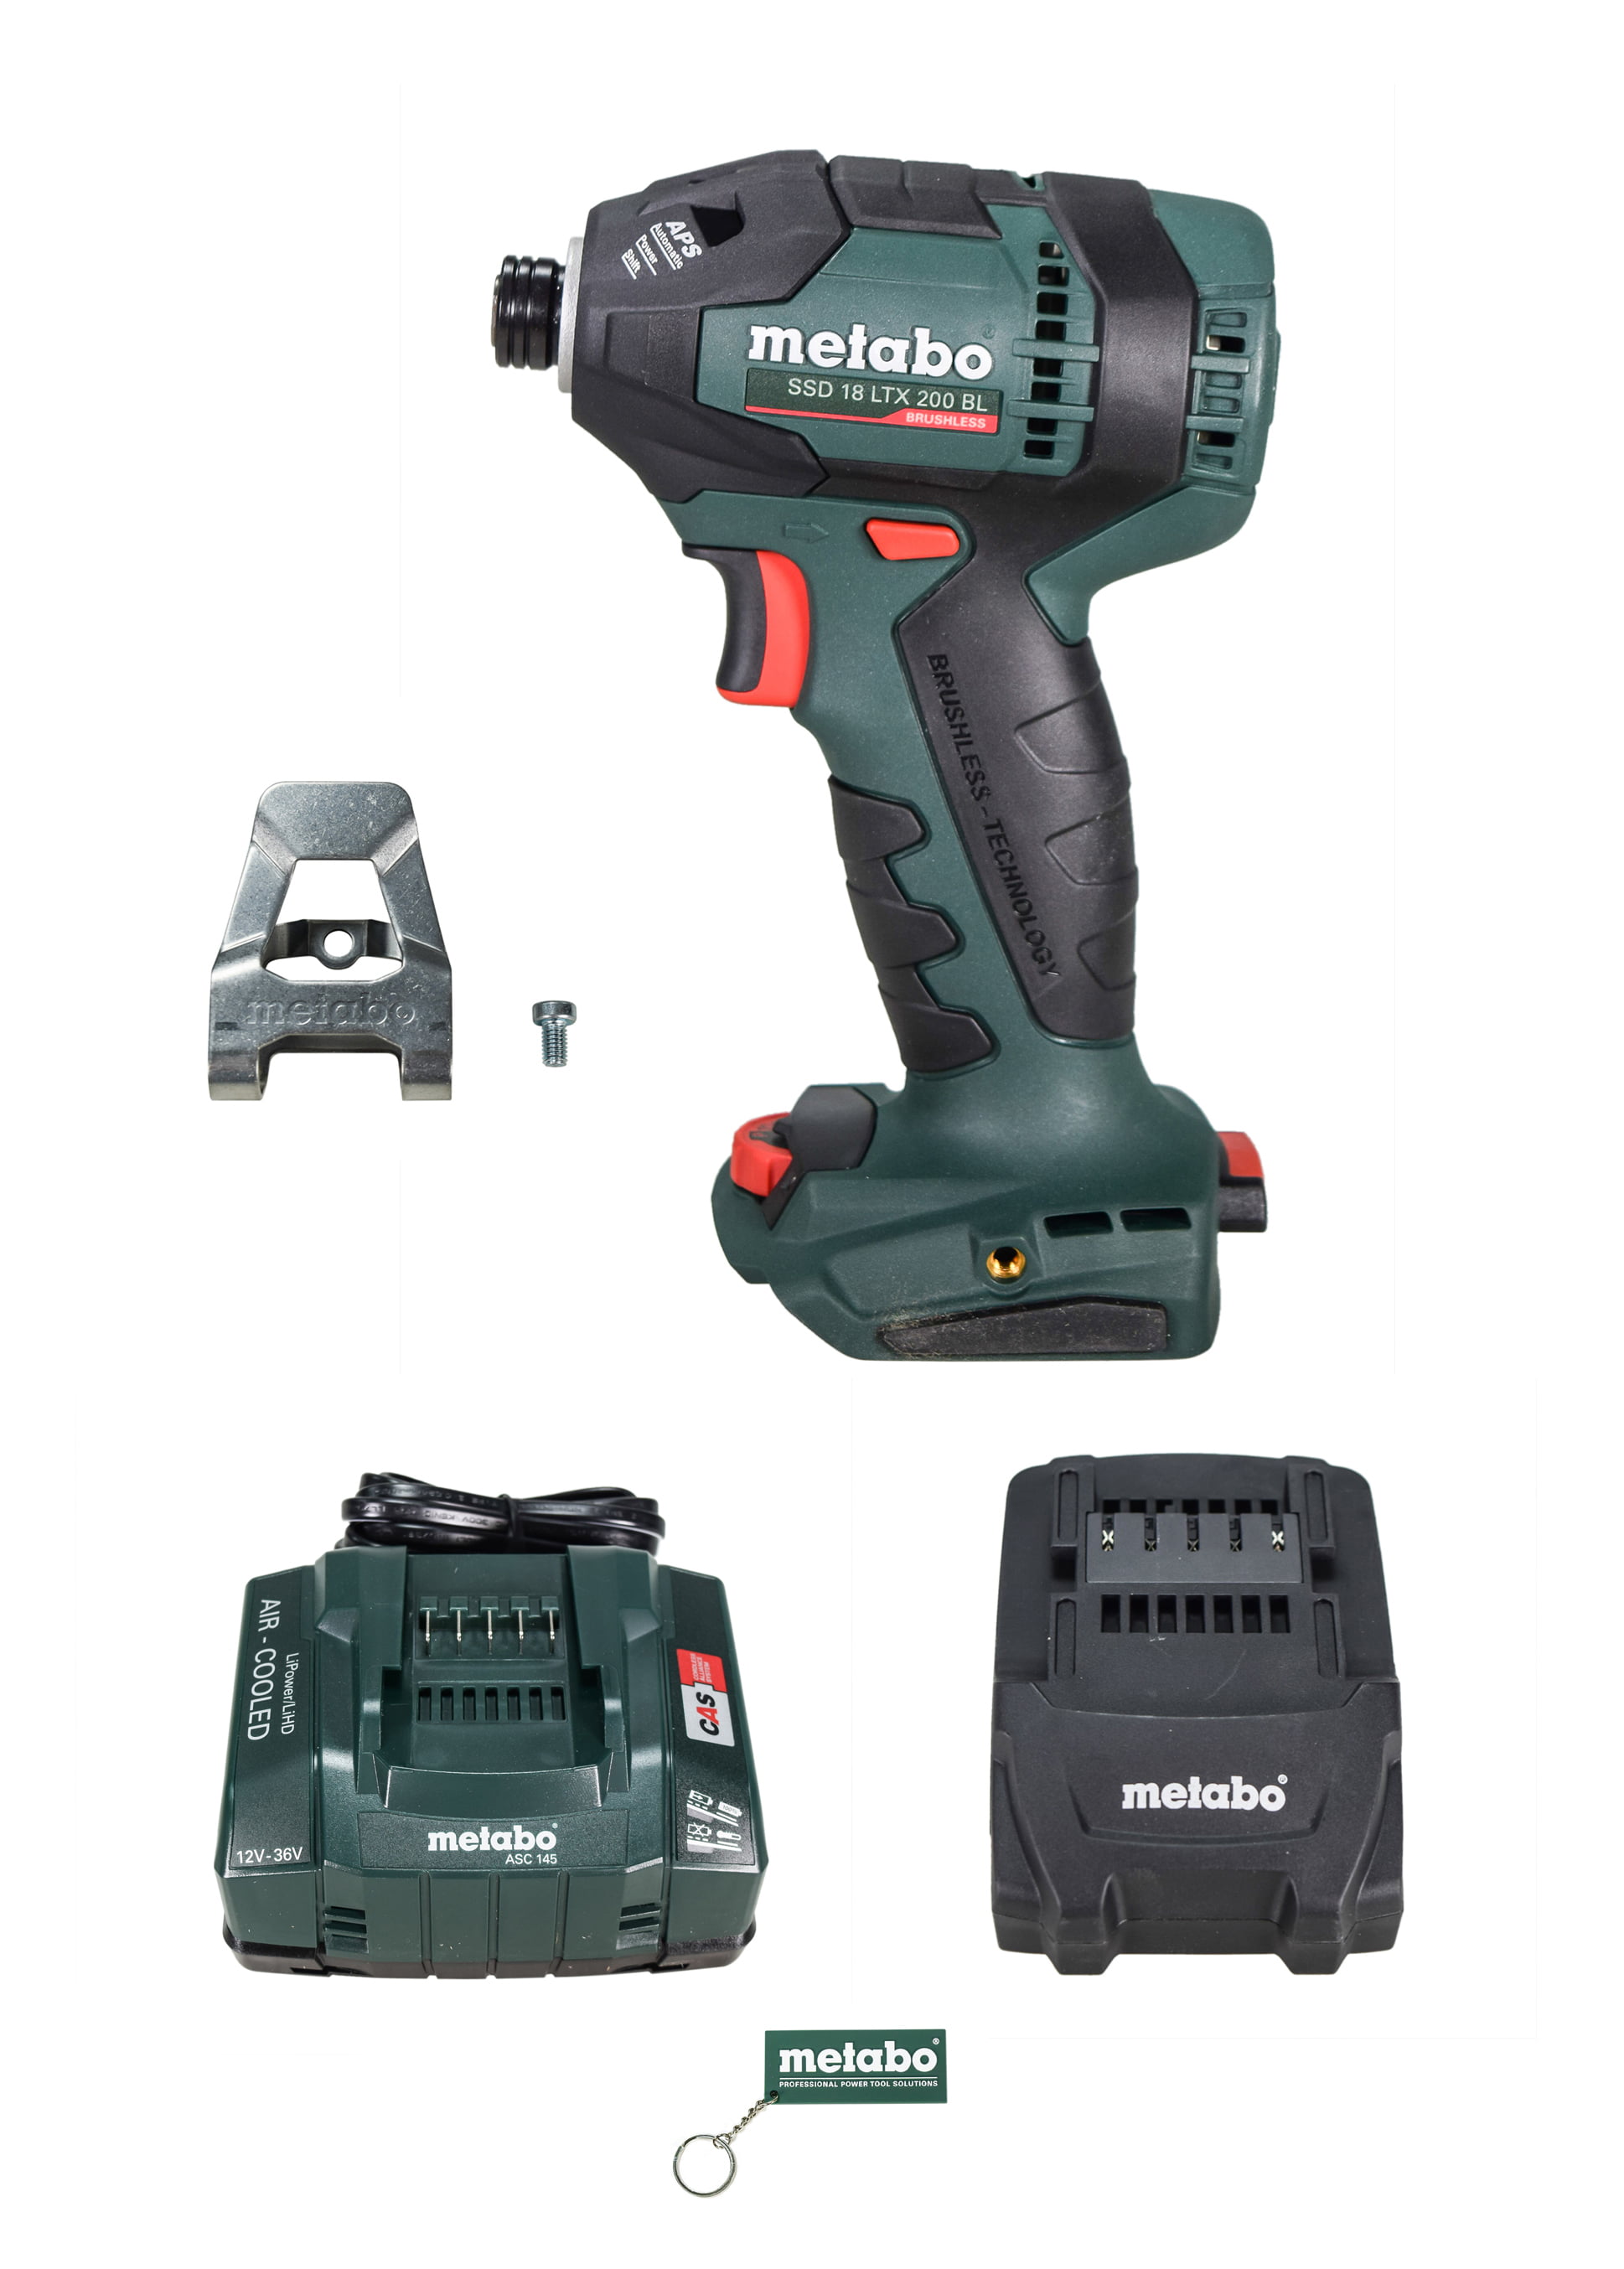 Metabo 602396890 SSD 18 LTX 200 Brushless Cordless Impact Driver With 2.0 Ah Lithium-Ion Battery & Charger - Walmart.com